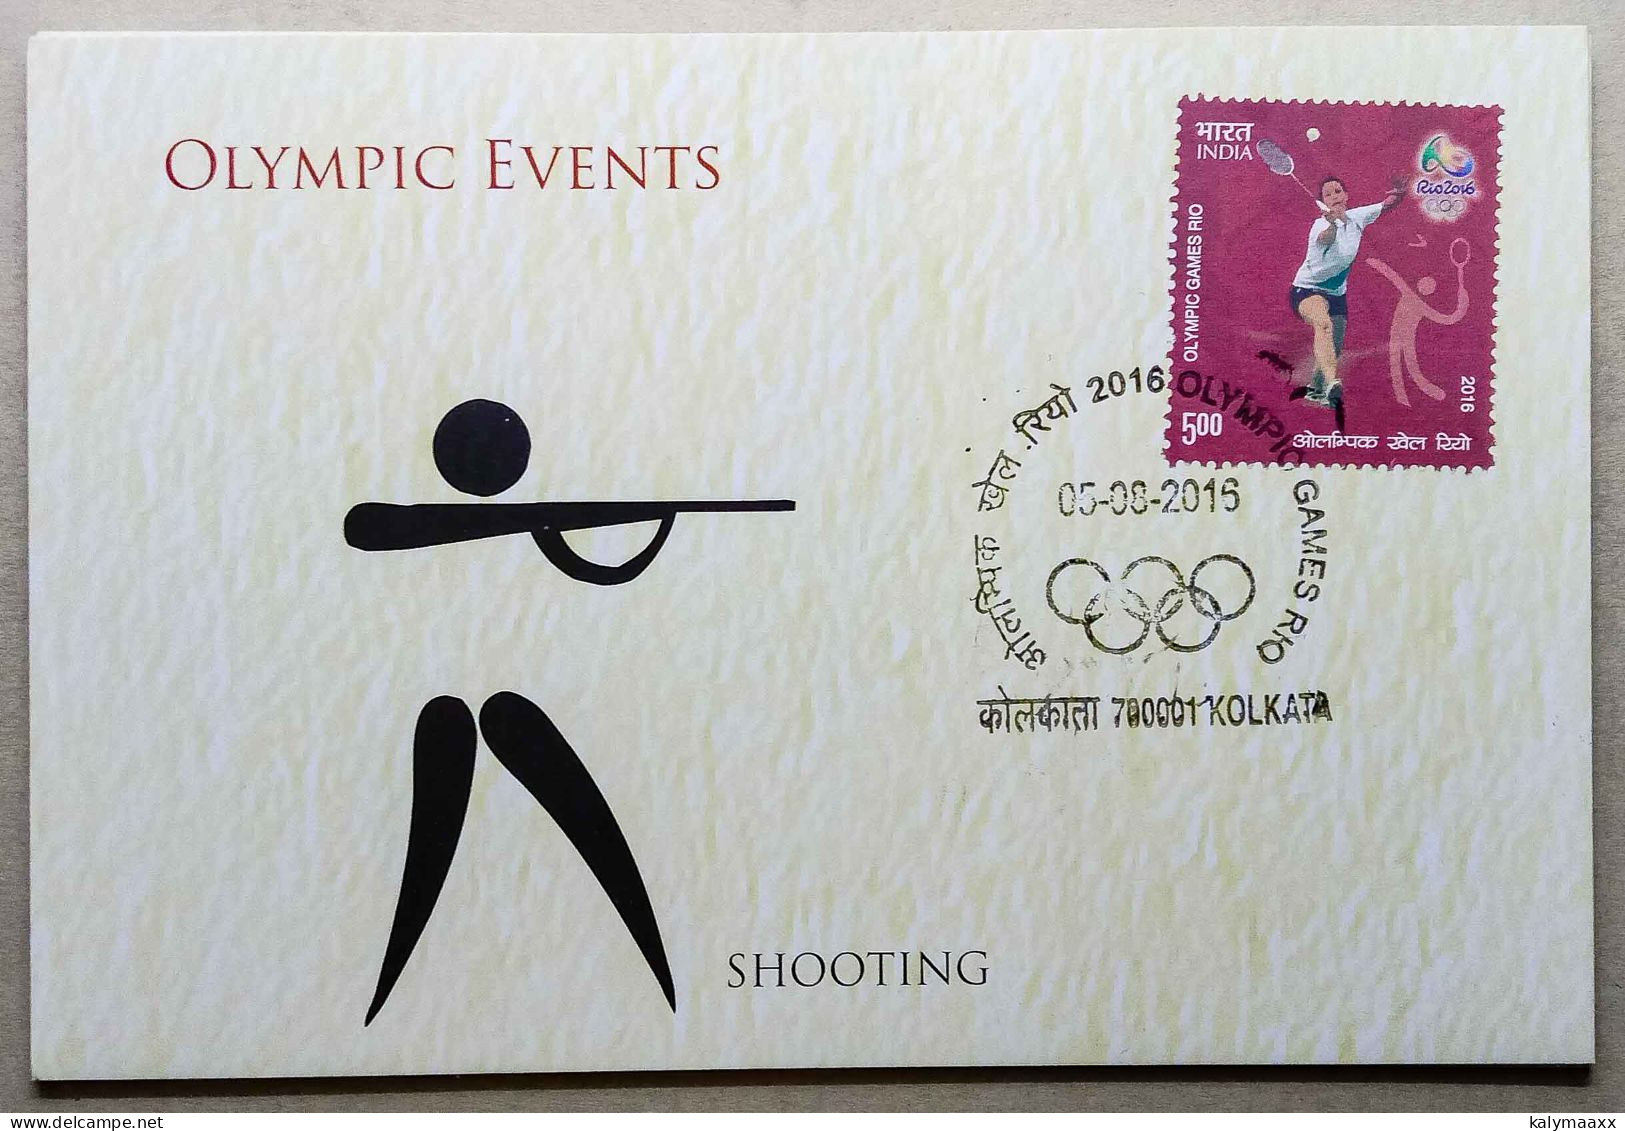 INDIA 2016 OLYMPIC EVENTS, SHOOTING, INDIA POST ISSUED POSTCARD...RARE - Shooting (Weapons)